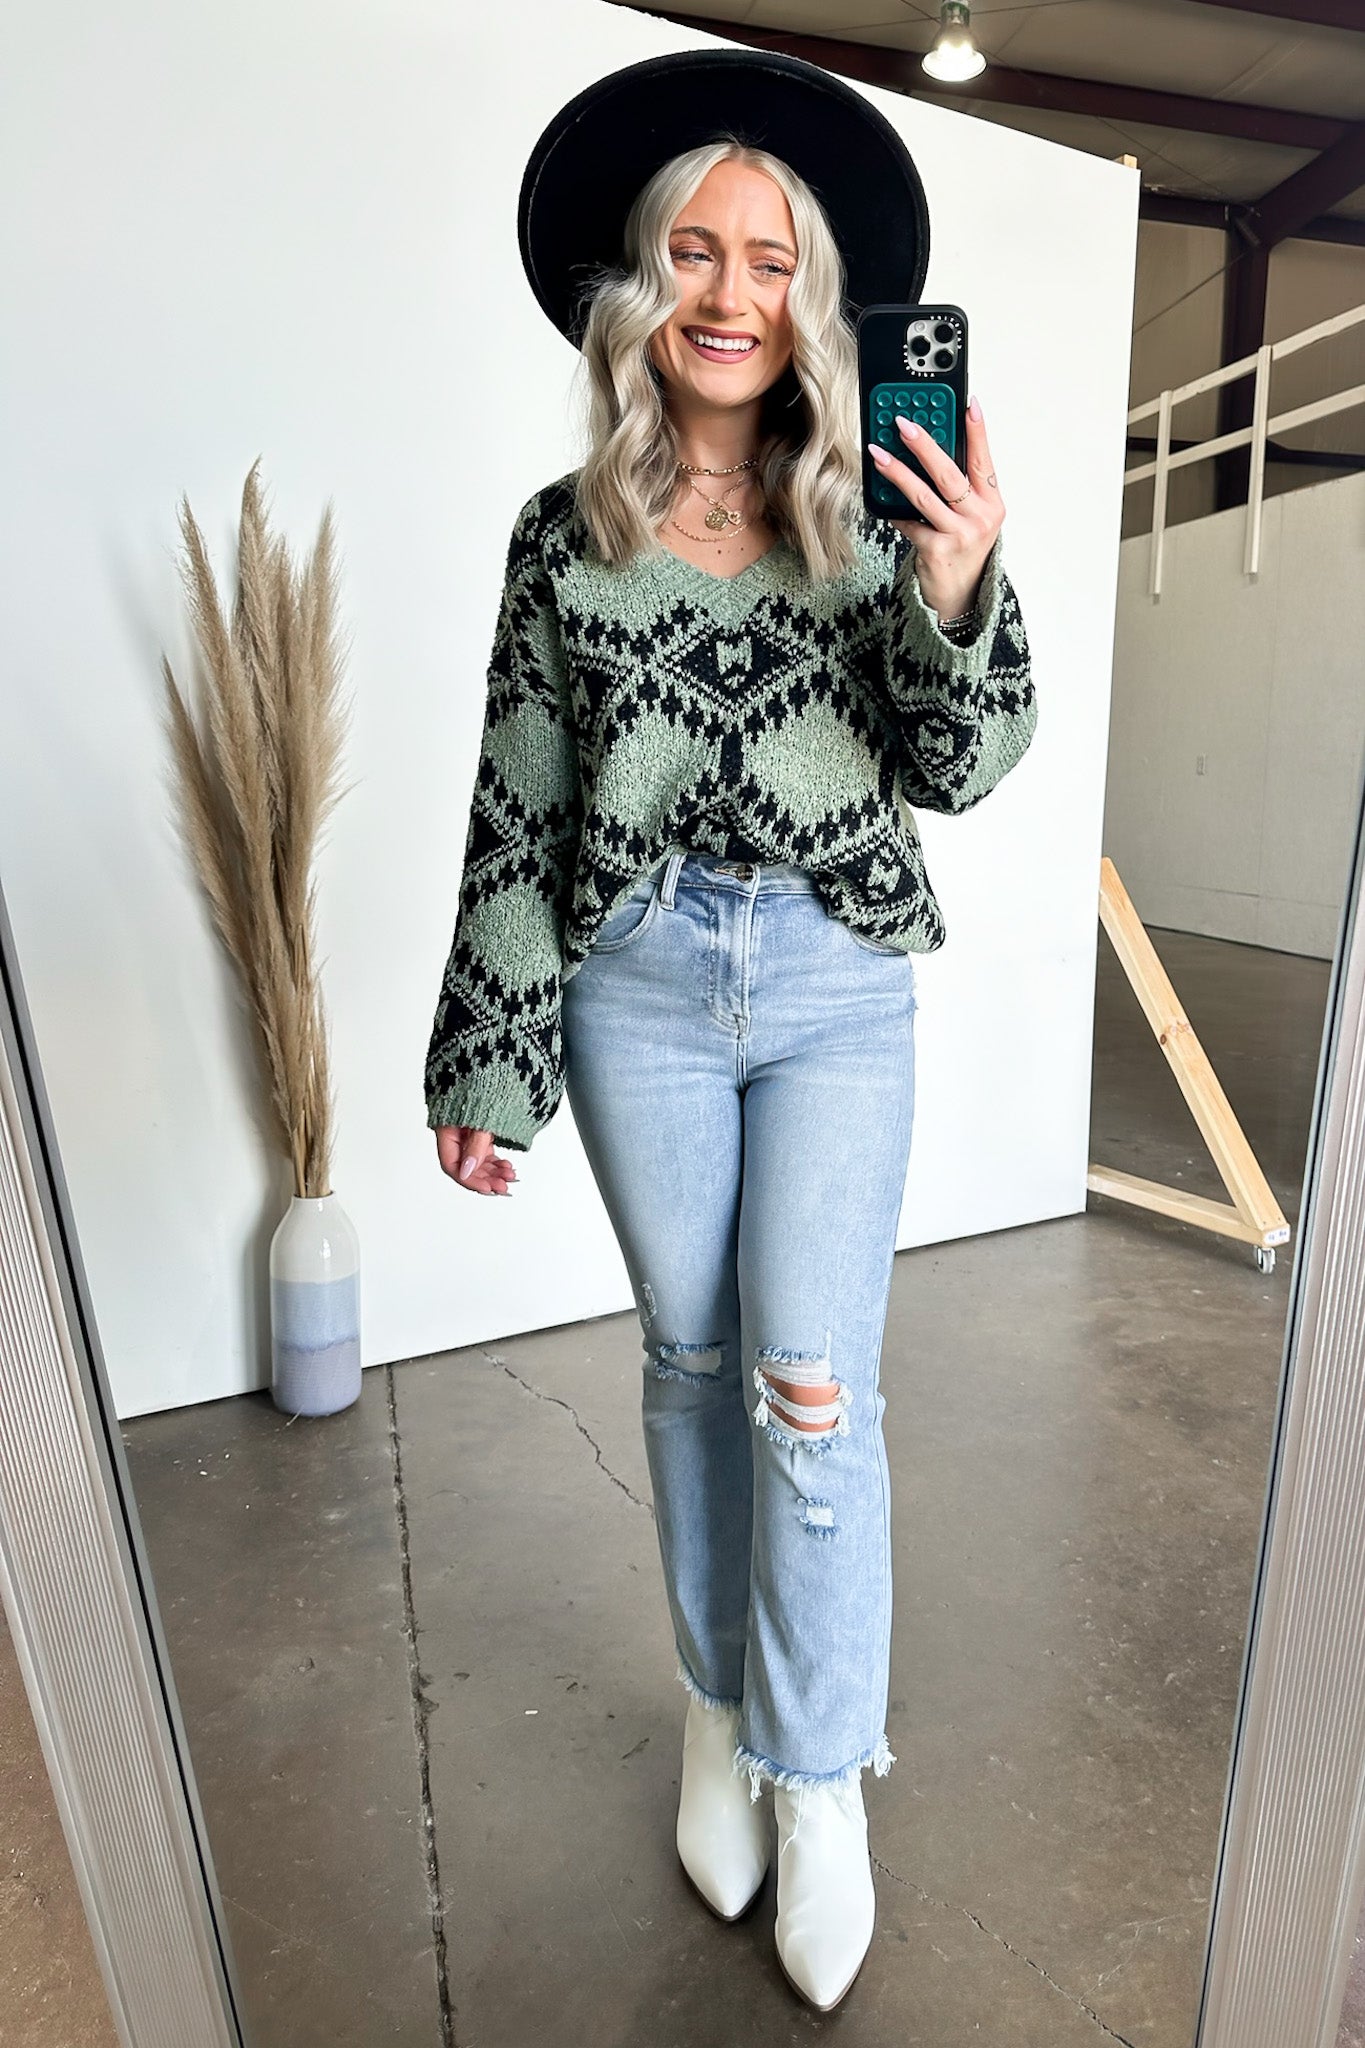  Lysandrah Geo Print V-Neck Sweater - FINAL SALE - Madison and Mallory